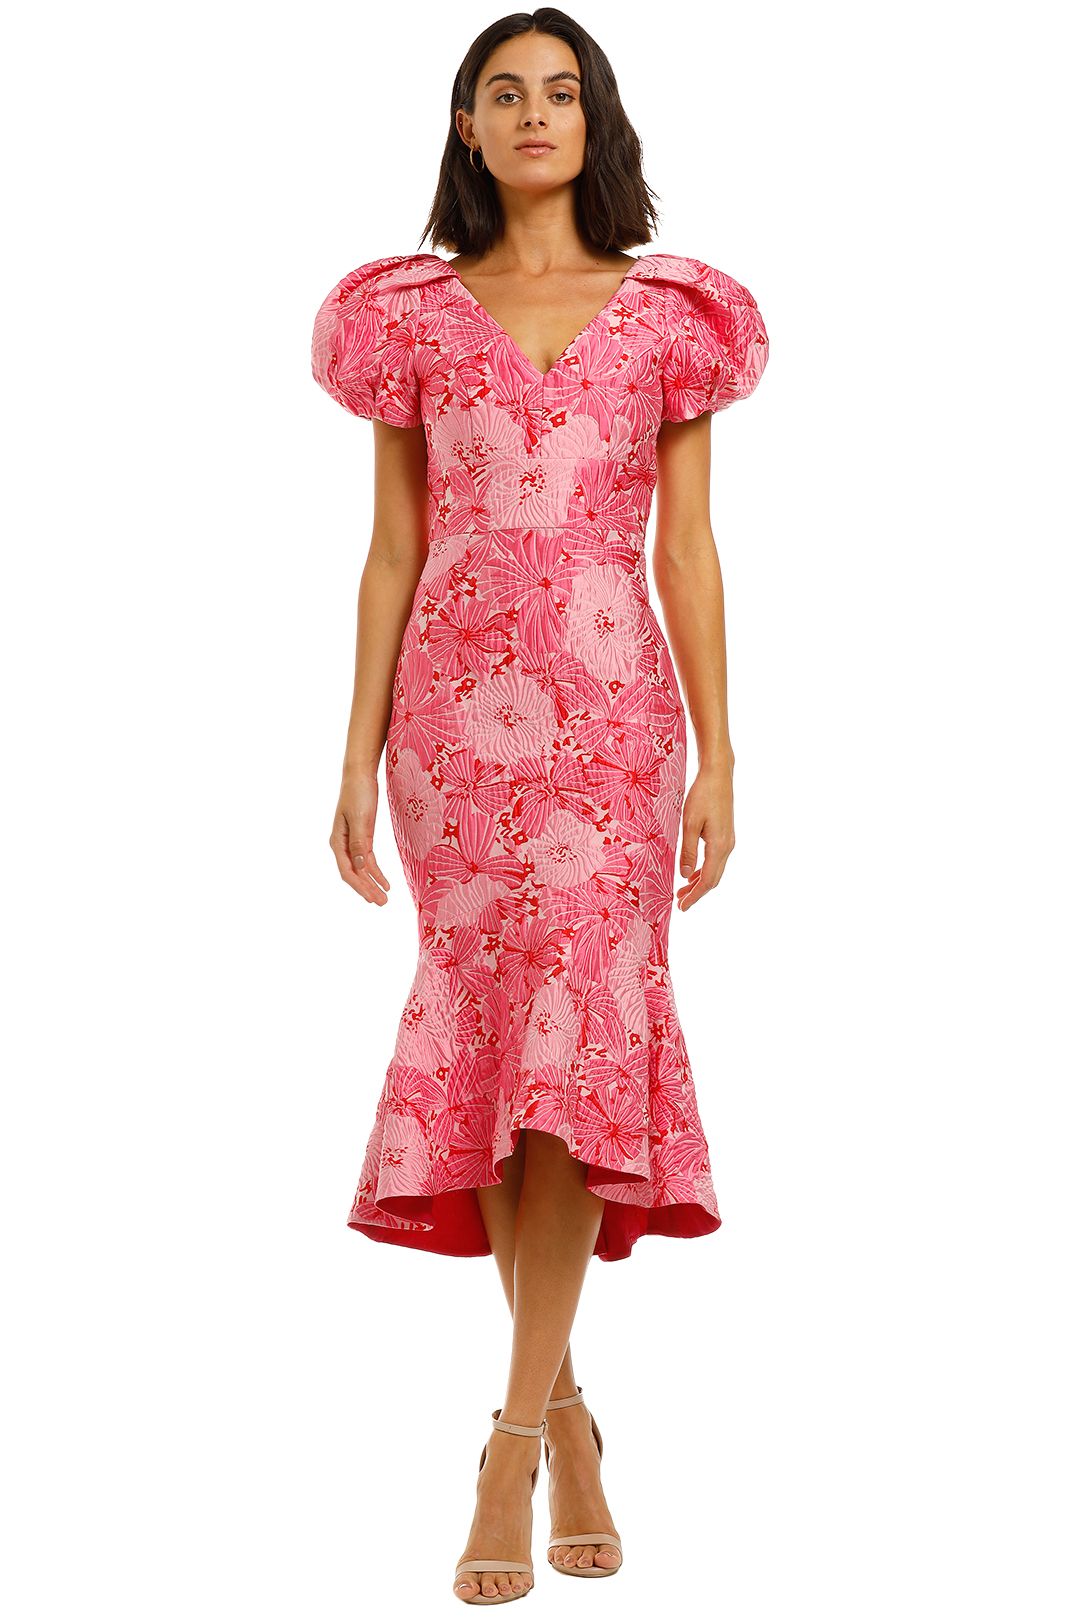 Love-Honor-Argento-Midi-Pink-Floral-Front